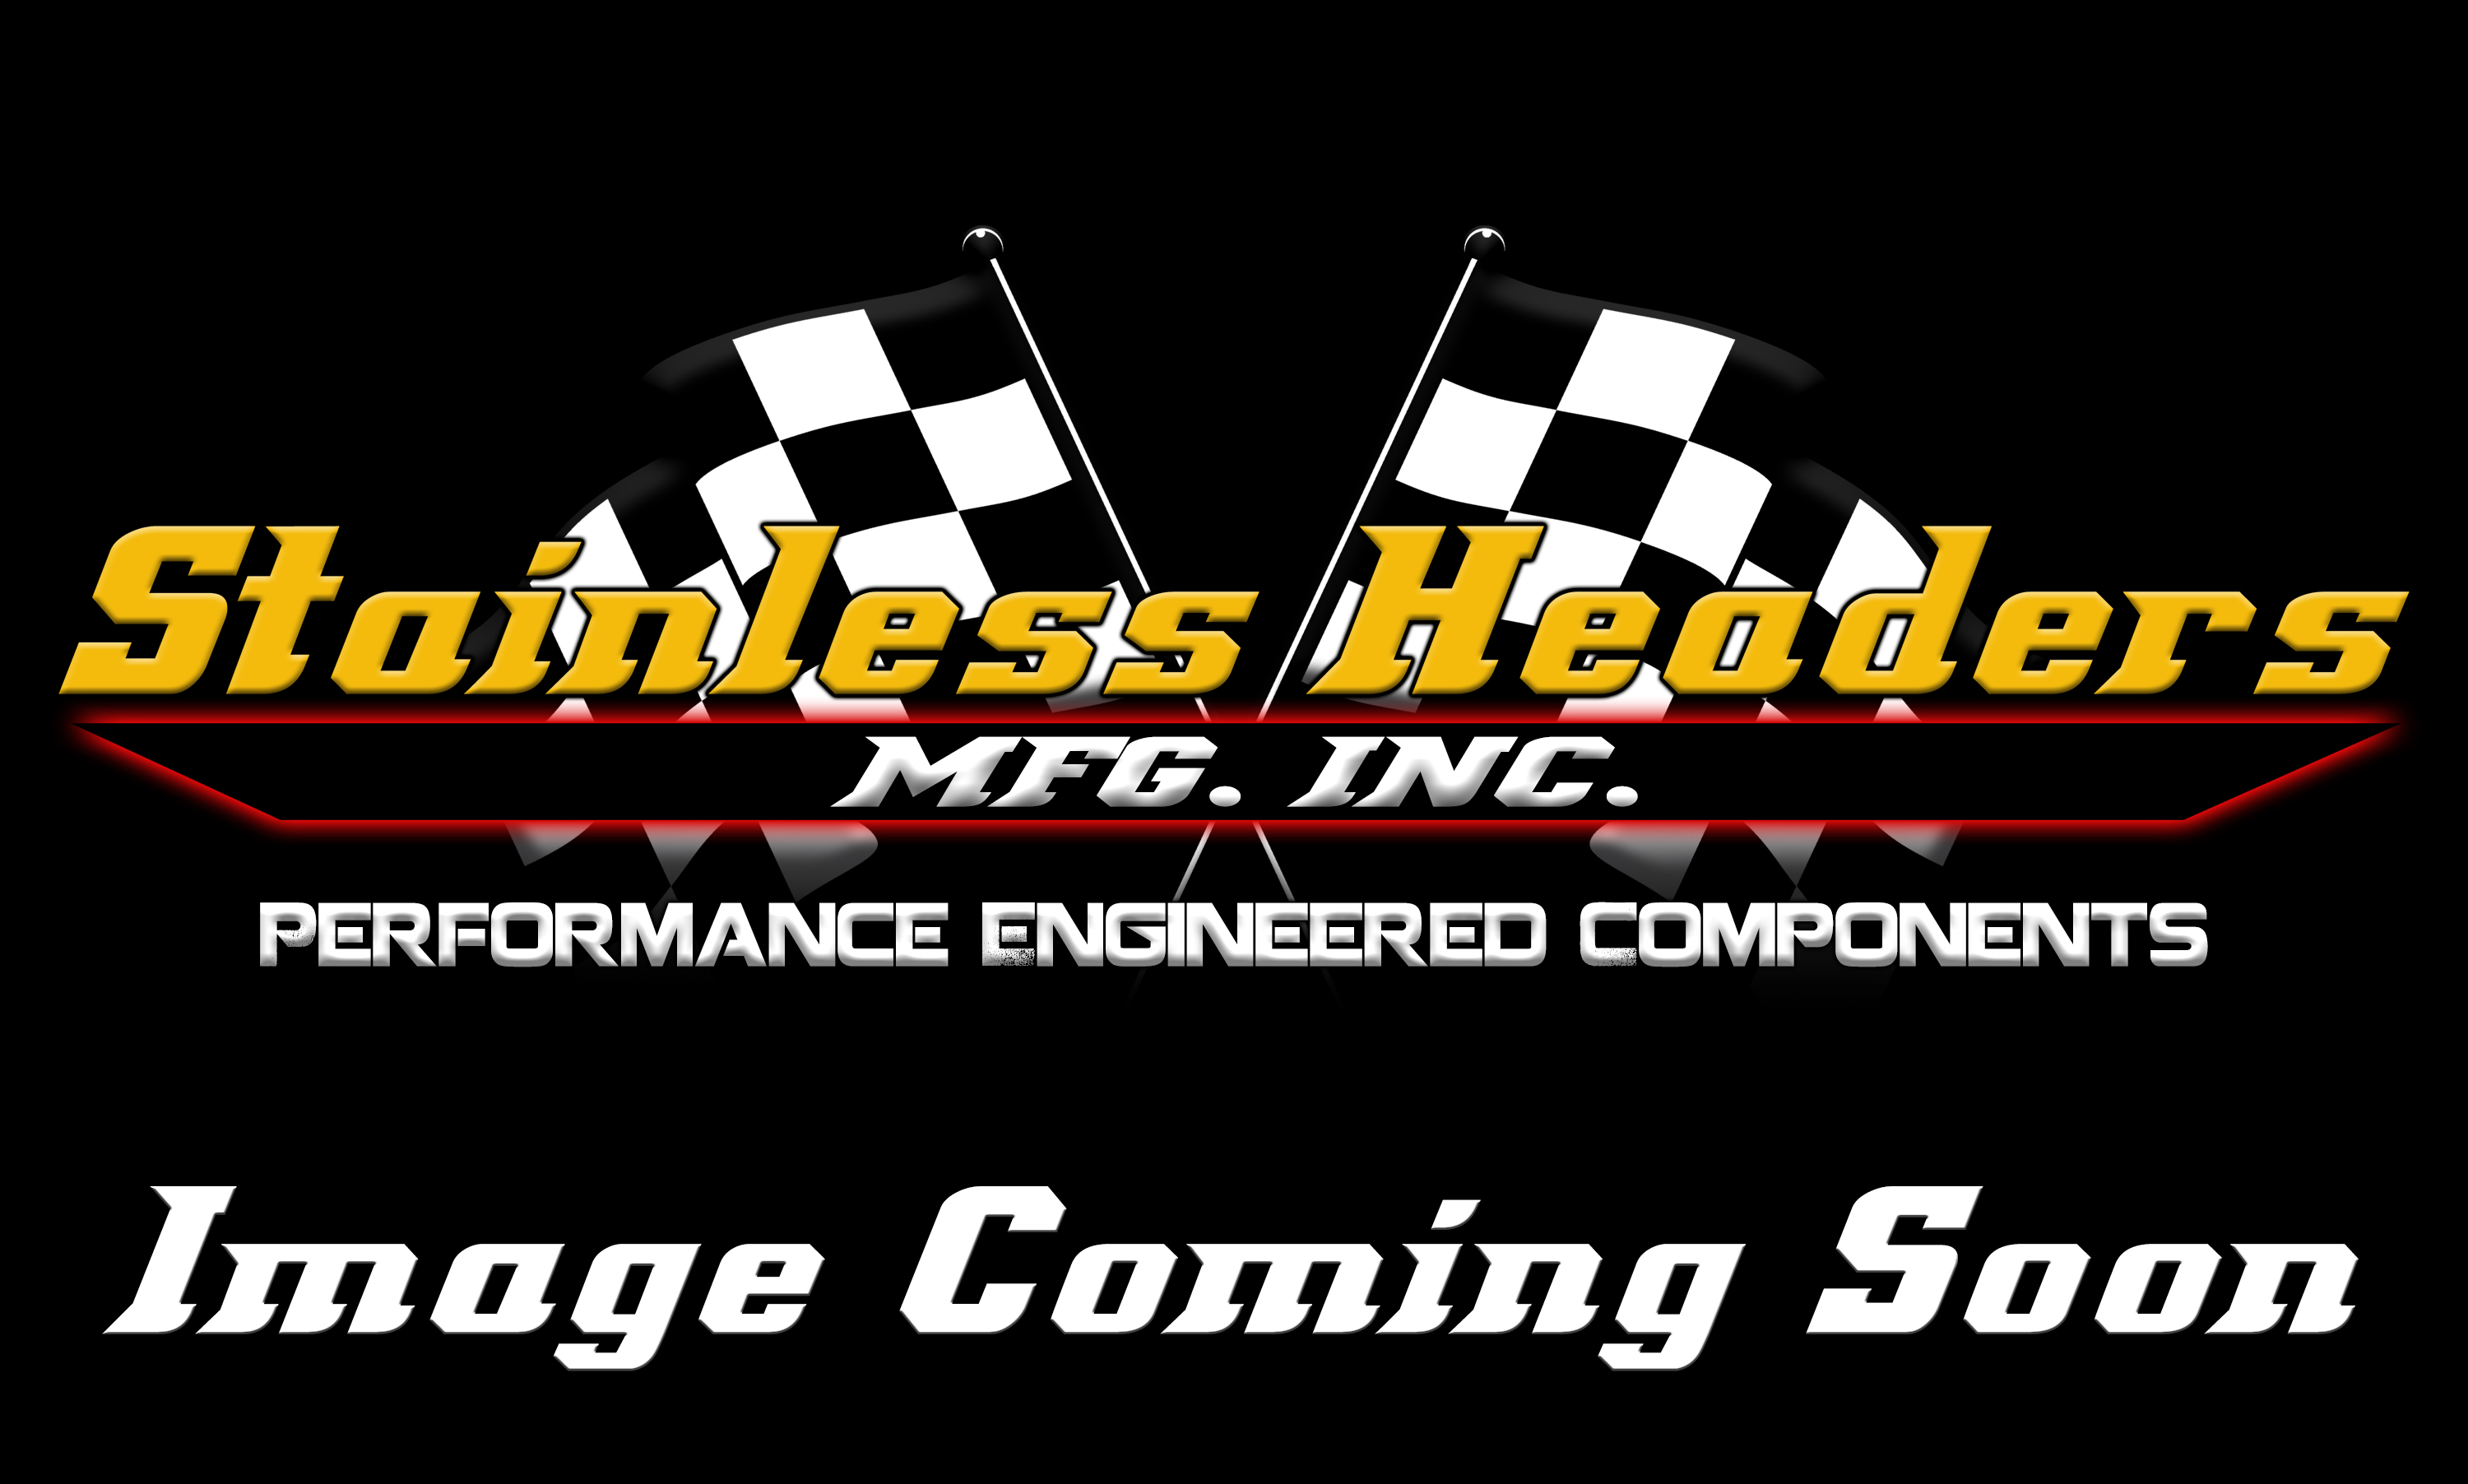 CompTurbo Technologies - CTR4202R-7485 Mid Frame Oil Lubricated 2.0 Turbocharger (1300 HP) - Image 3